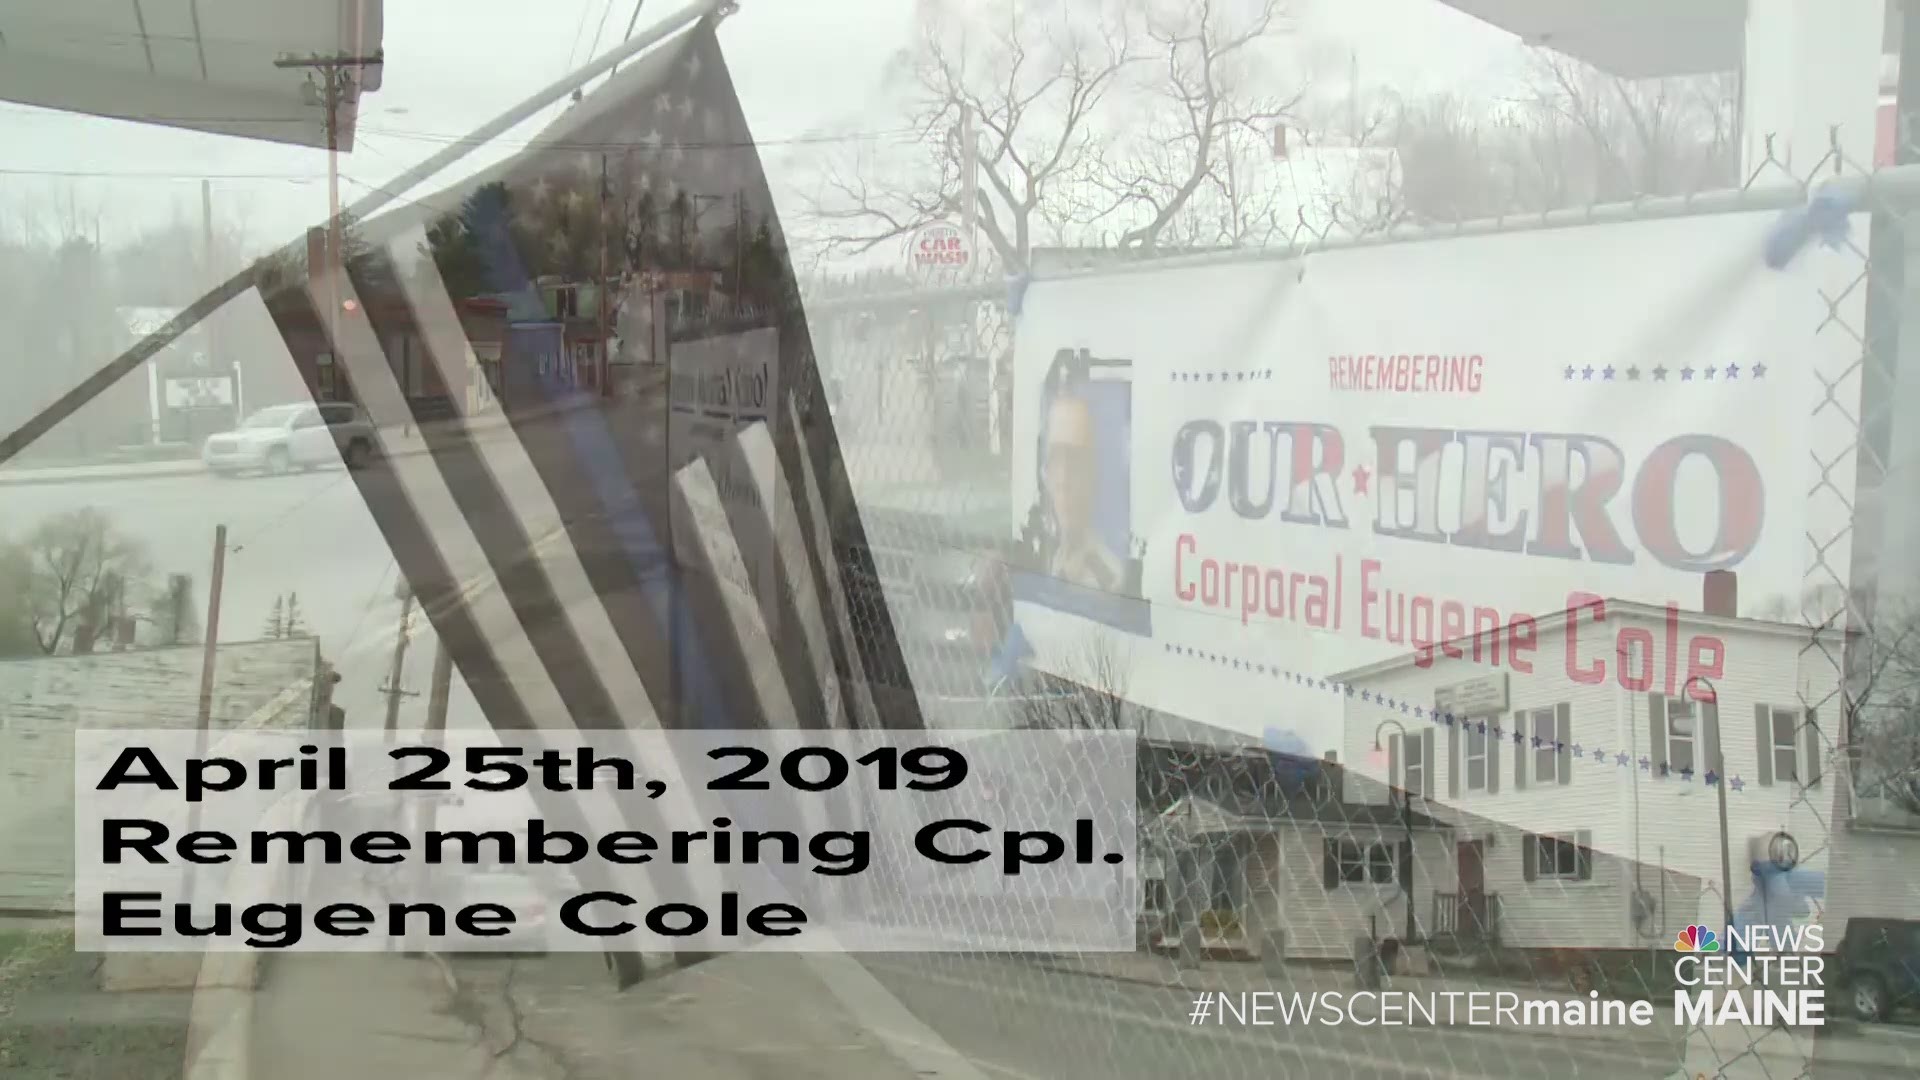 April 25, 2019 marks one year since Somerset County Sheriff's Deputy Corporal Eugene Cole was killed on the line of duty.